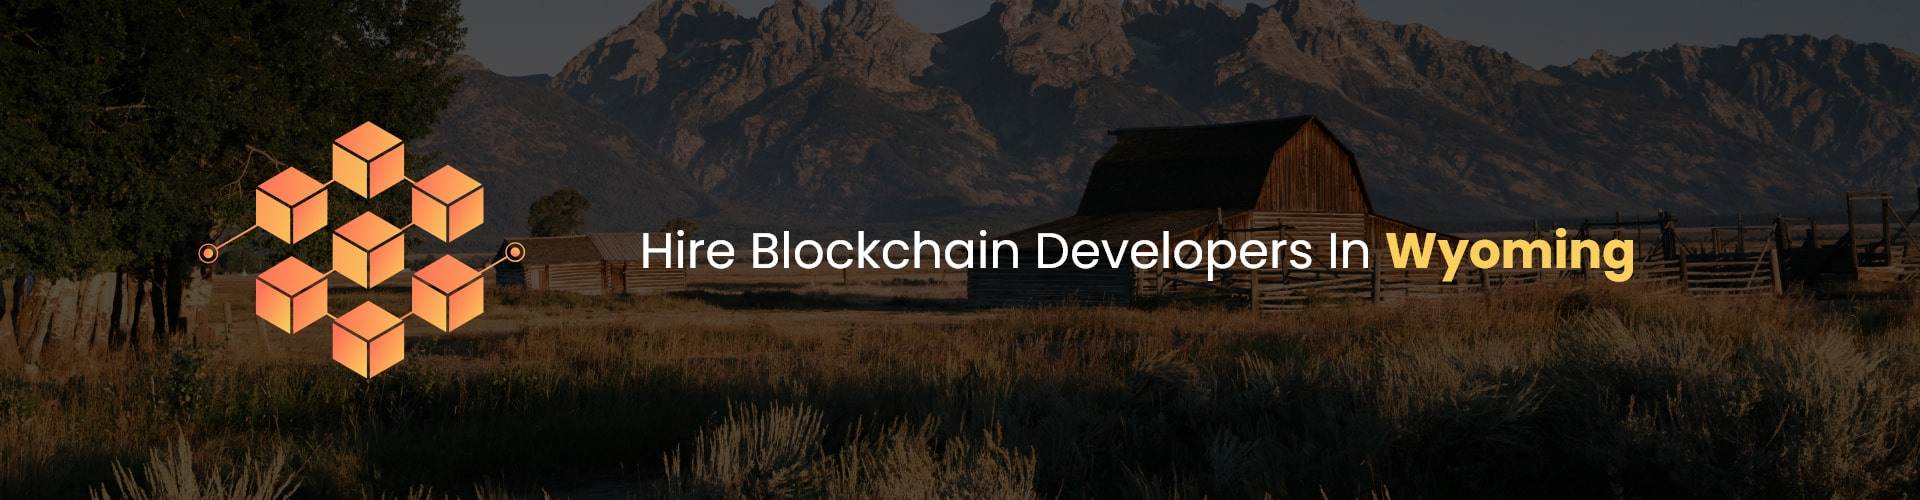 hire blockchain developers in wyoming